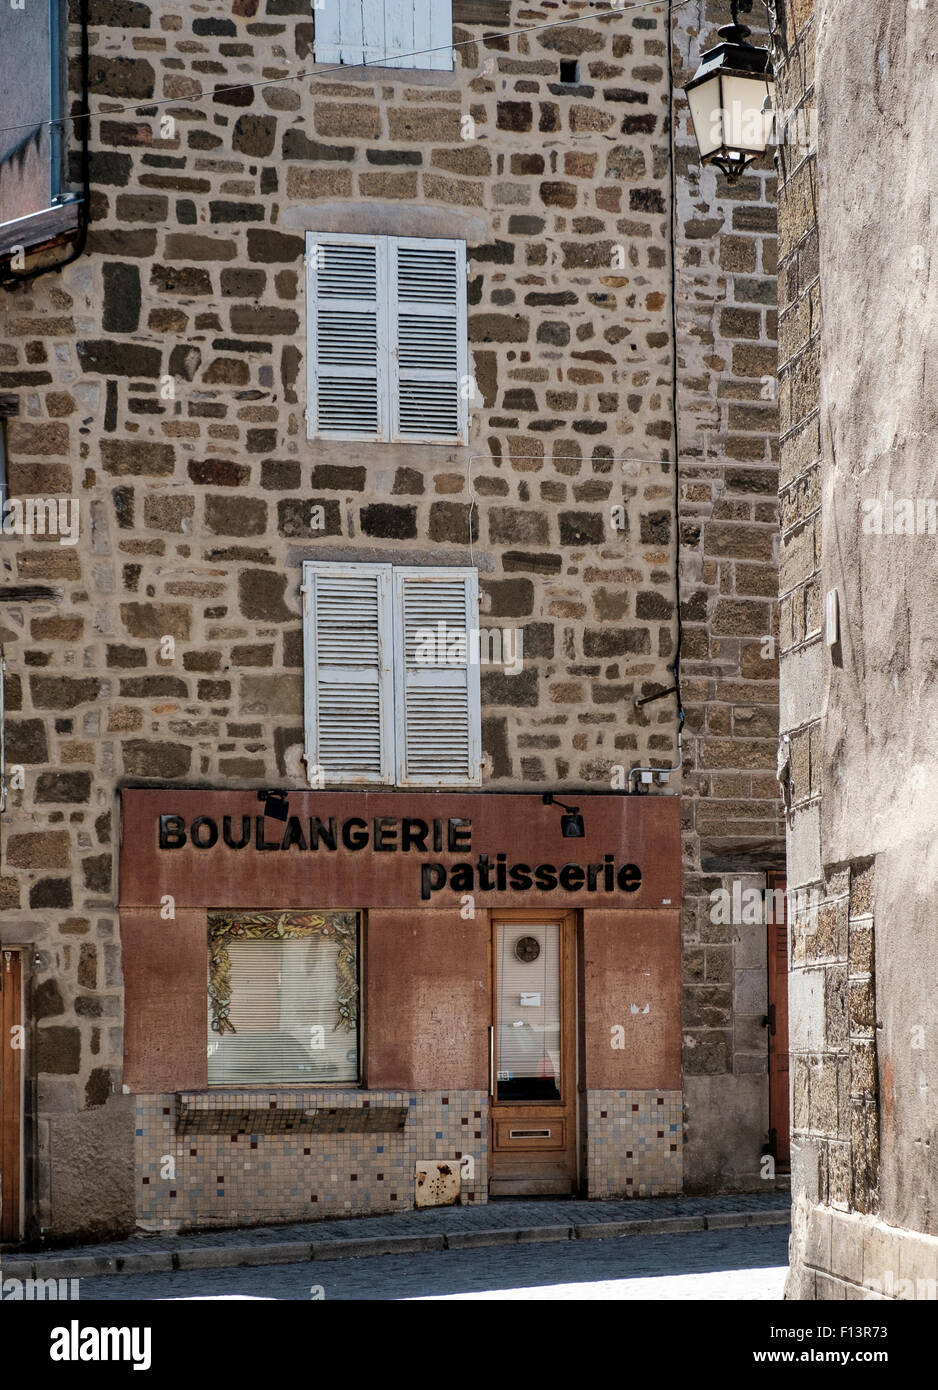 A boulangerie patisserie in the town of Langeac, Haute-Loire, Auvergne, France Stock Photo